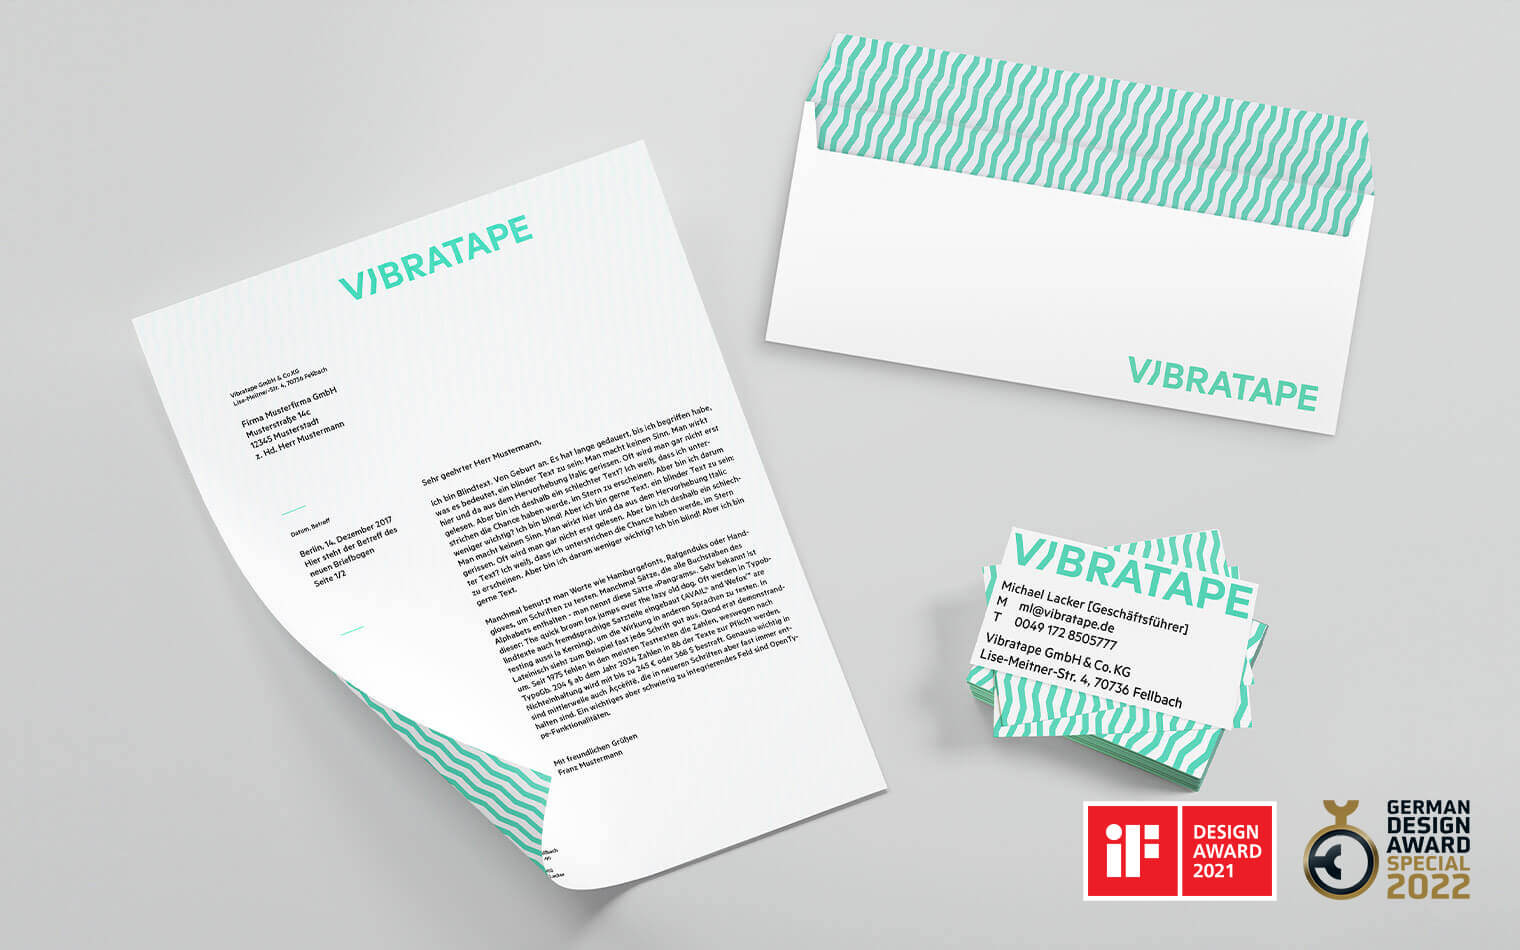 This picture shows the business equipment of Vibratape GmbH & Co.KG and the logos iF Design Award 2021 and German Design Award 2022.